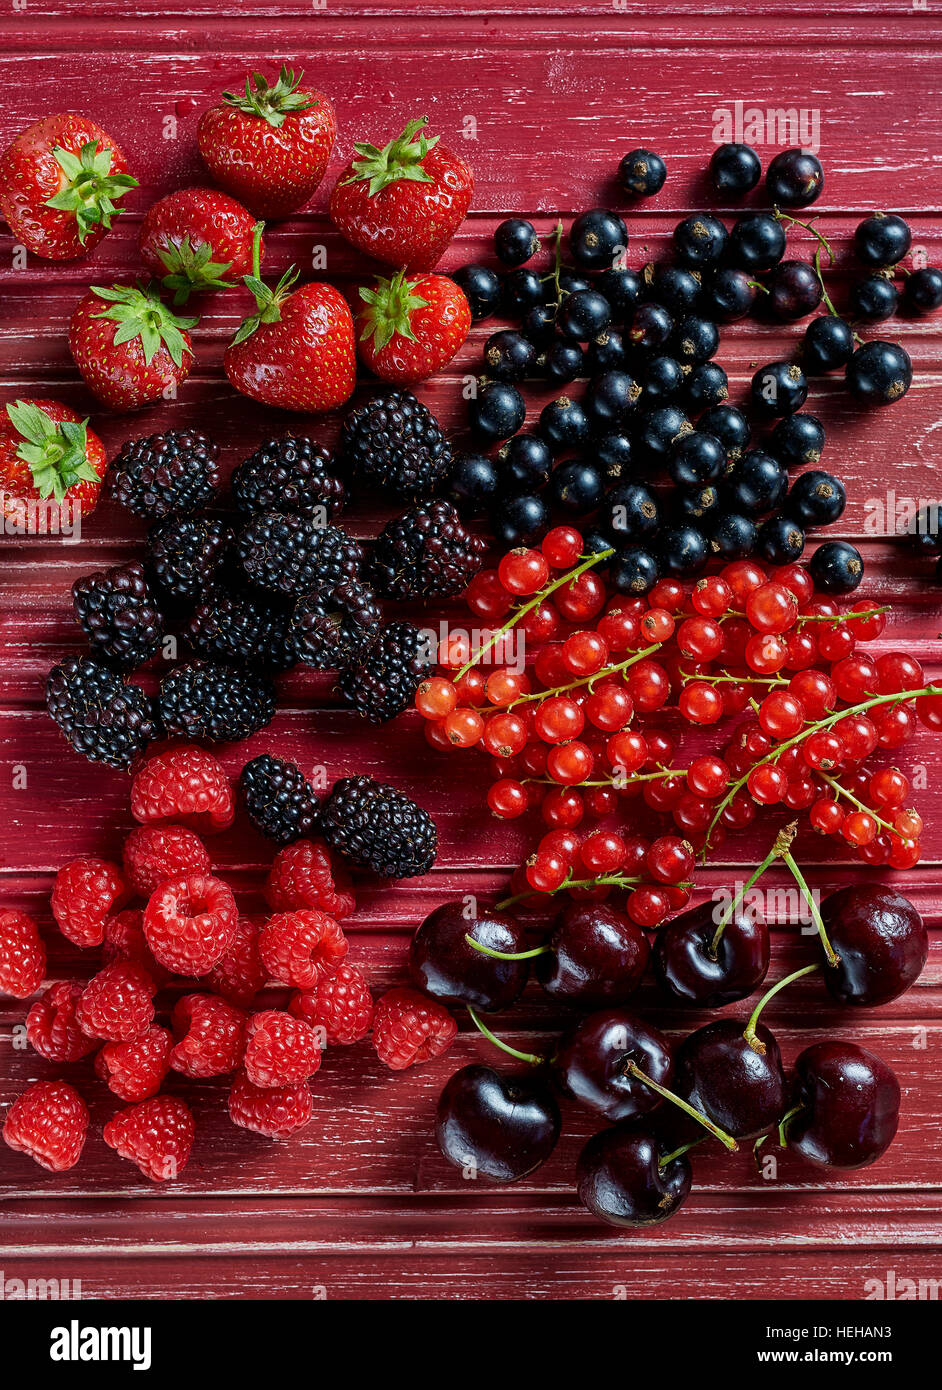 Red fruits strawberries black berries red currants cherries black currants red raspberries over head group shiny vibrant vivid fresh healthy sweet Stock Photo